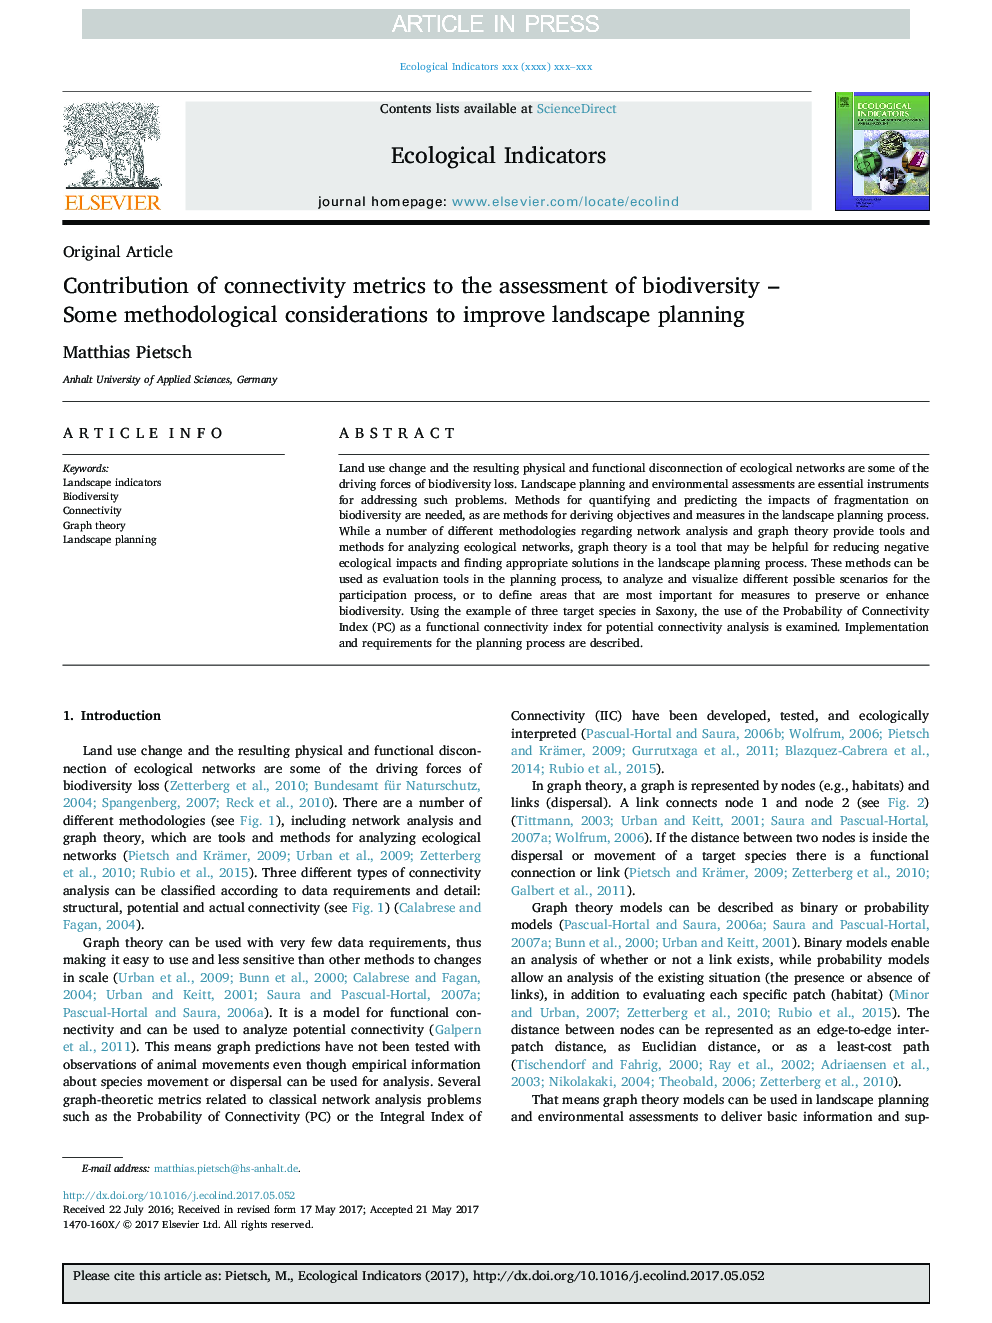 Contribution of connectivity metrics to the assessment of biodiversity - Some methodological considerations to improve landscape planning